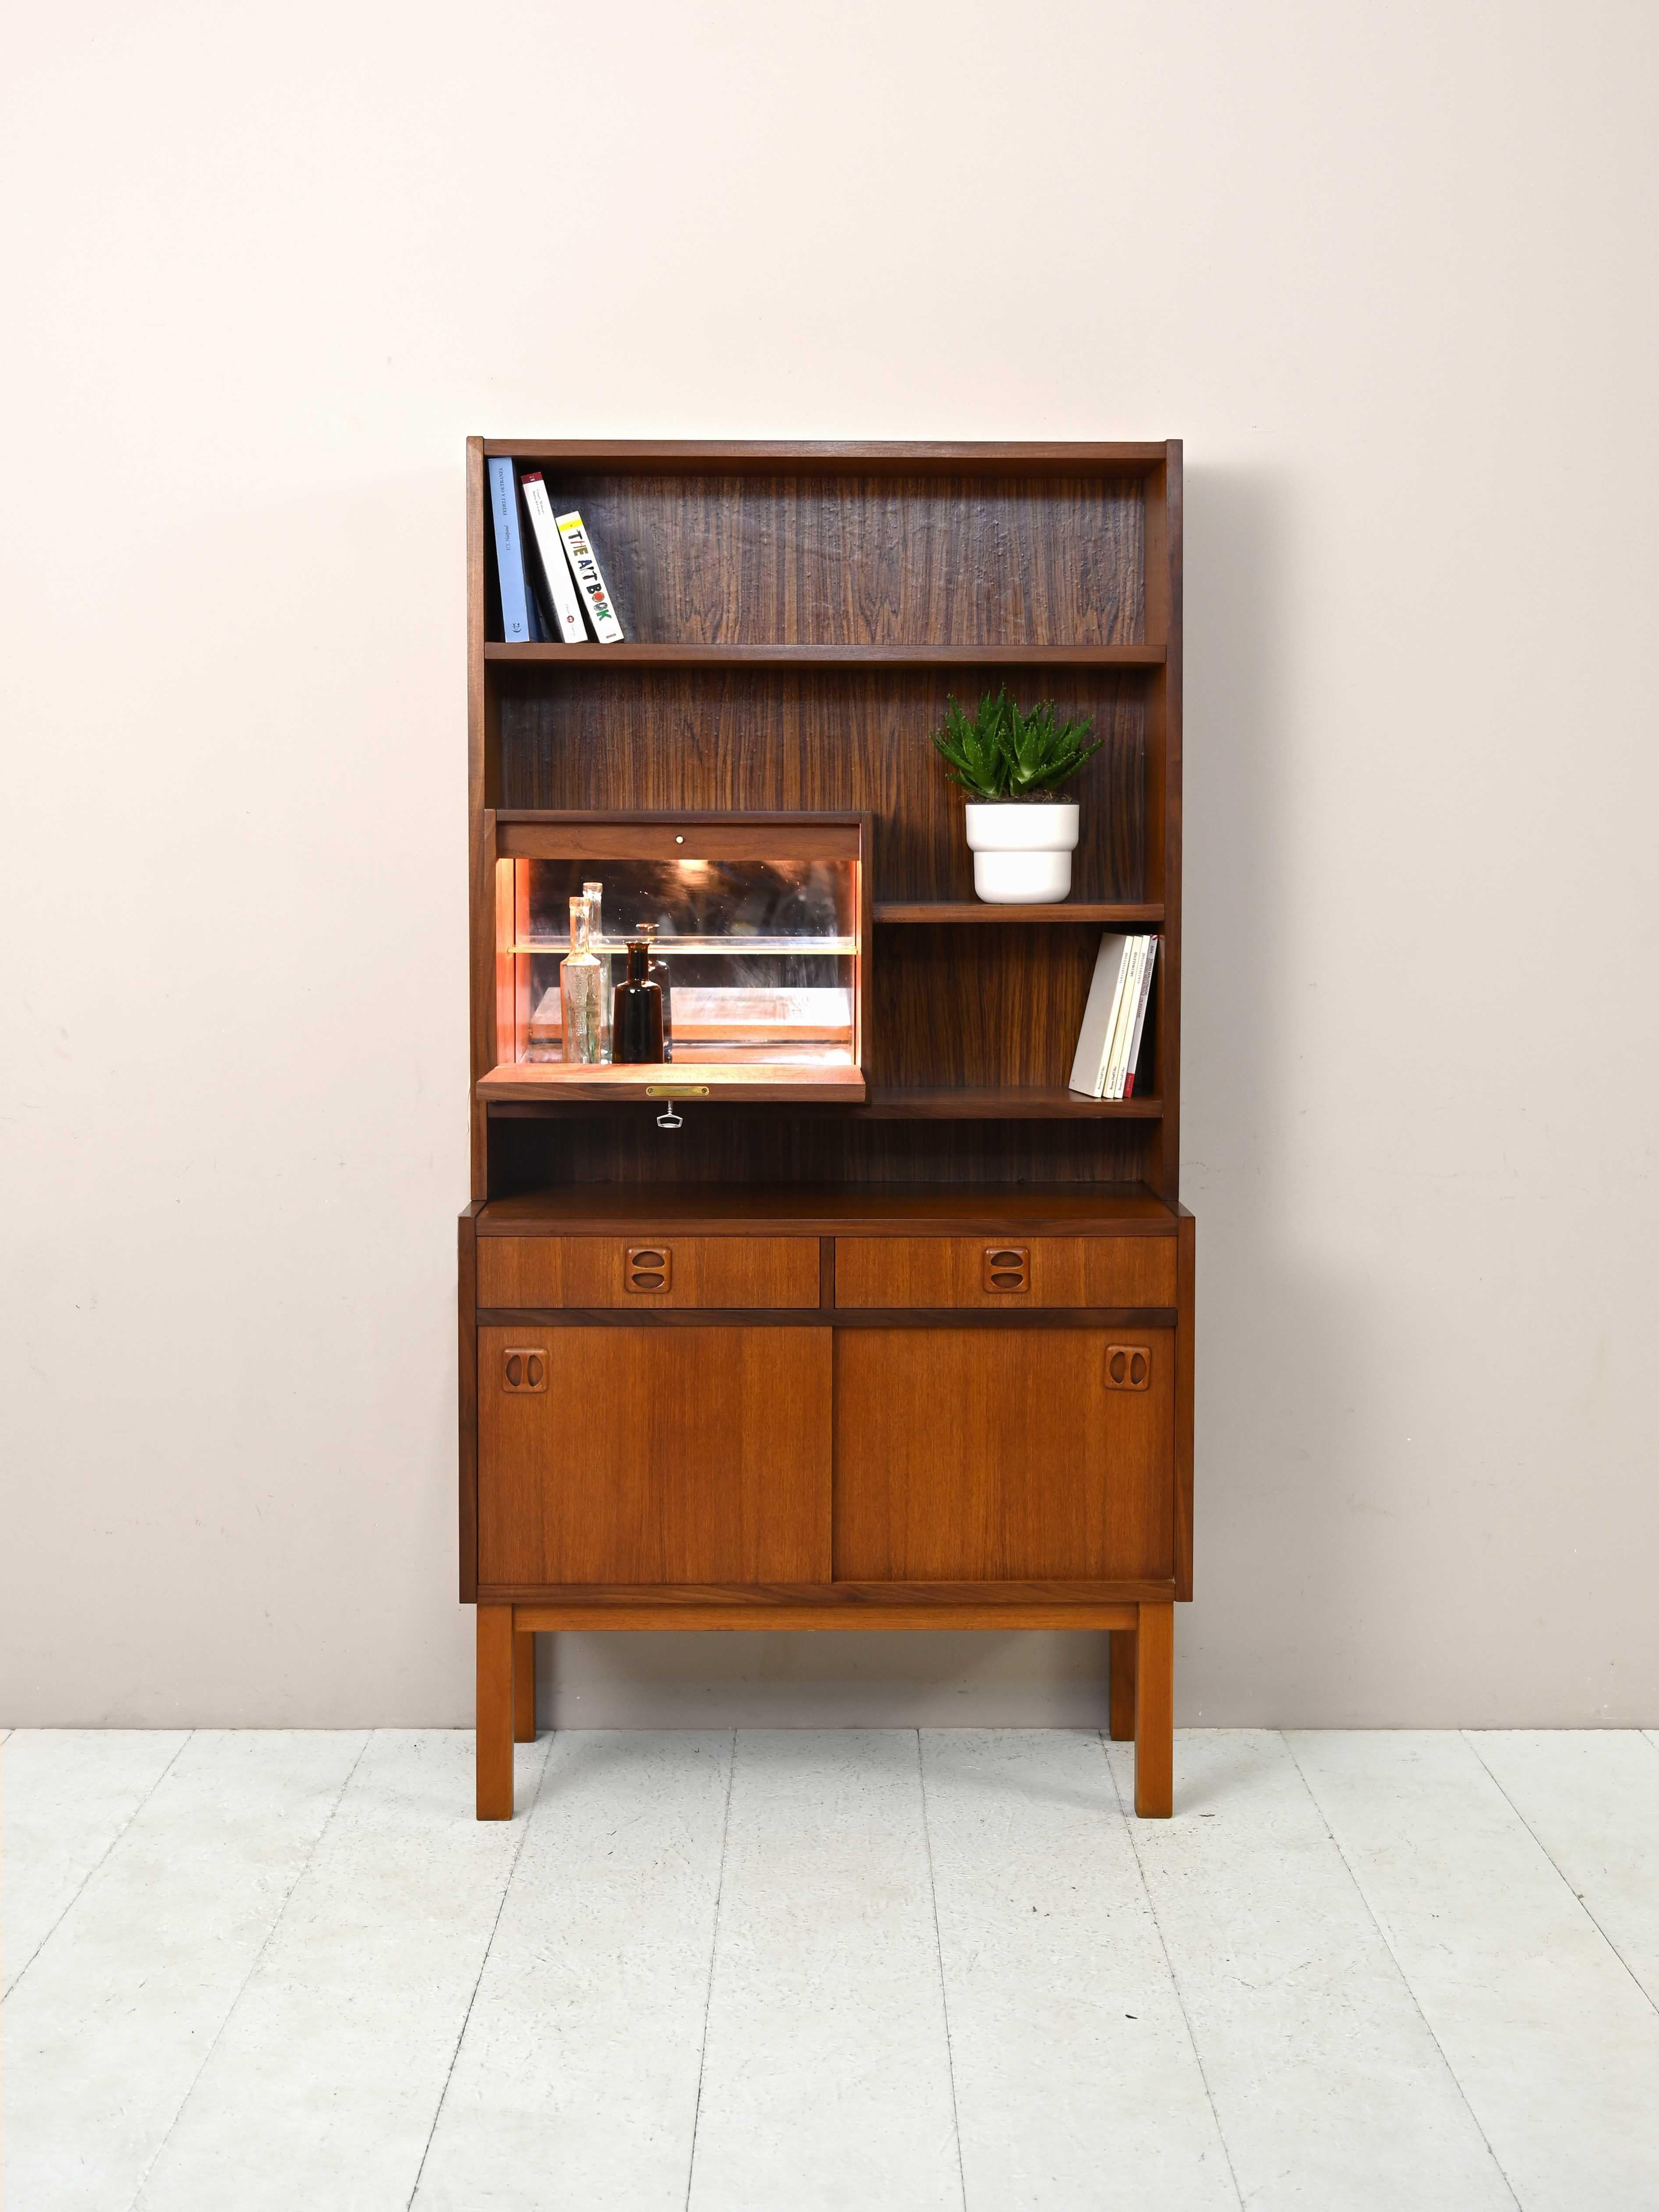 Scandinavian cabinet with shelving and bottle compartment.

A practical and original bookcase consisting of a cabinet with sliding doors and two drawers and a shelving system with adjustable height. There is a mirrored bar compartment equipped